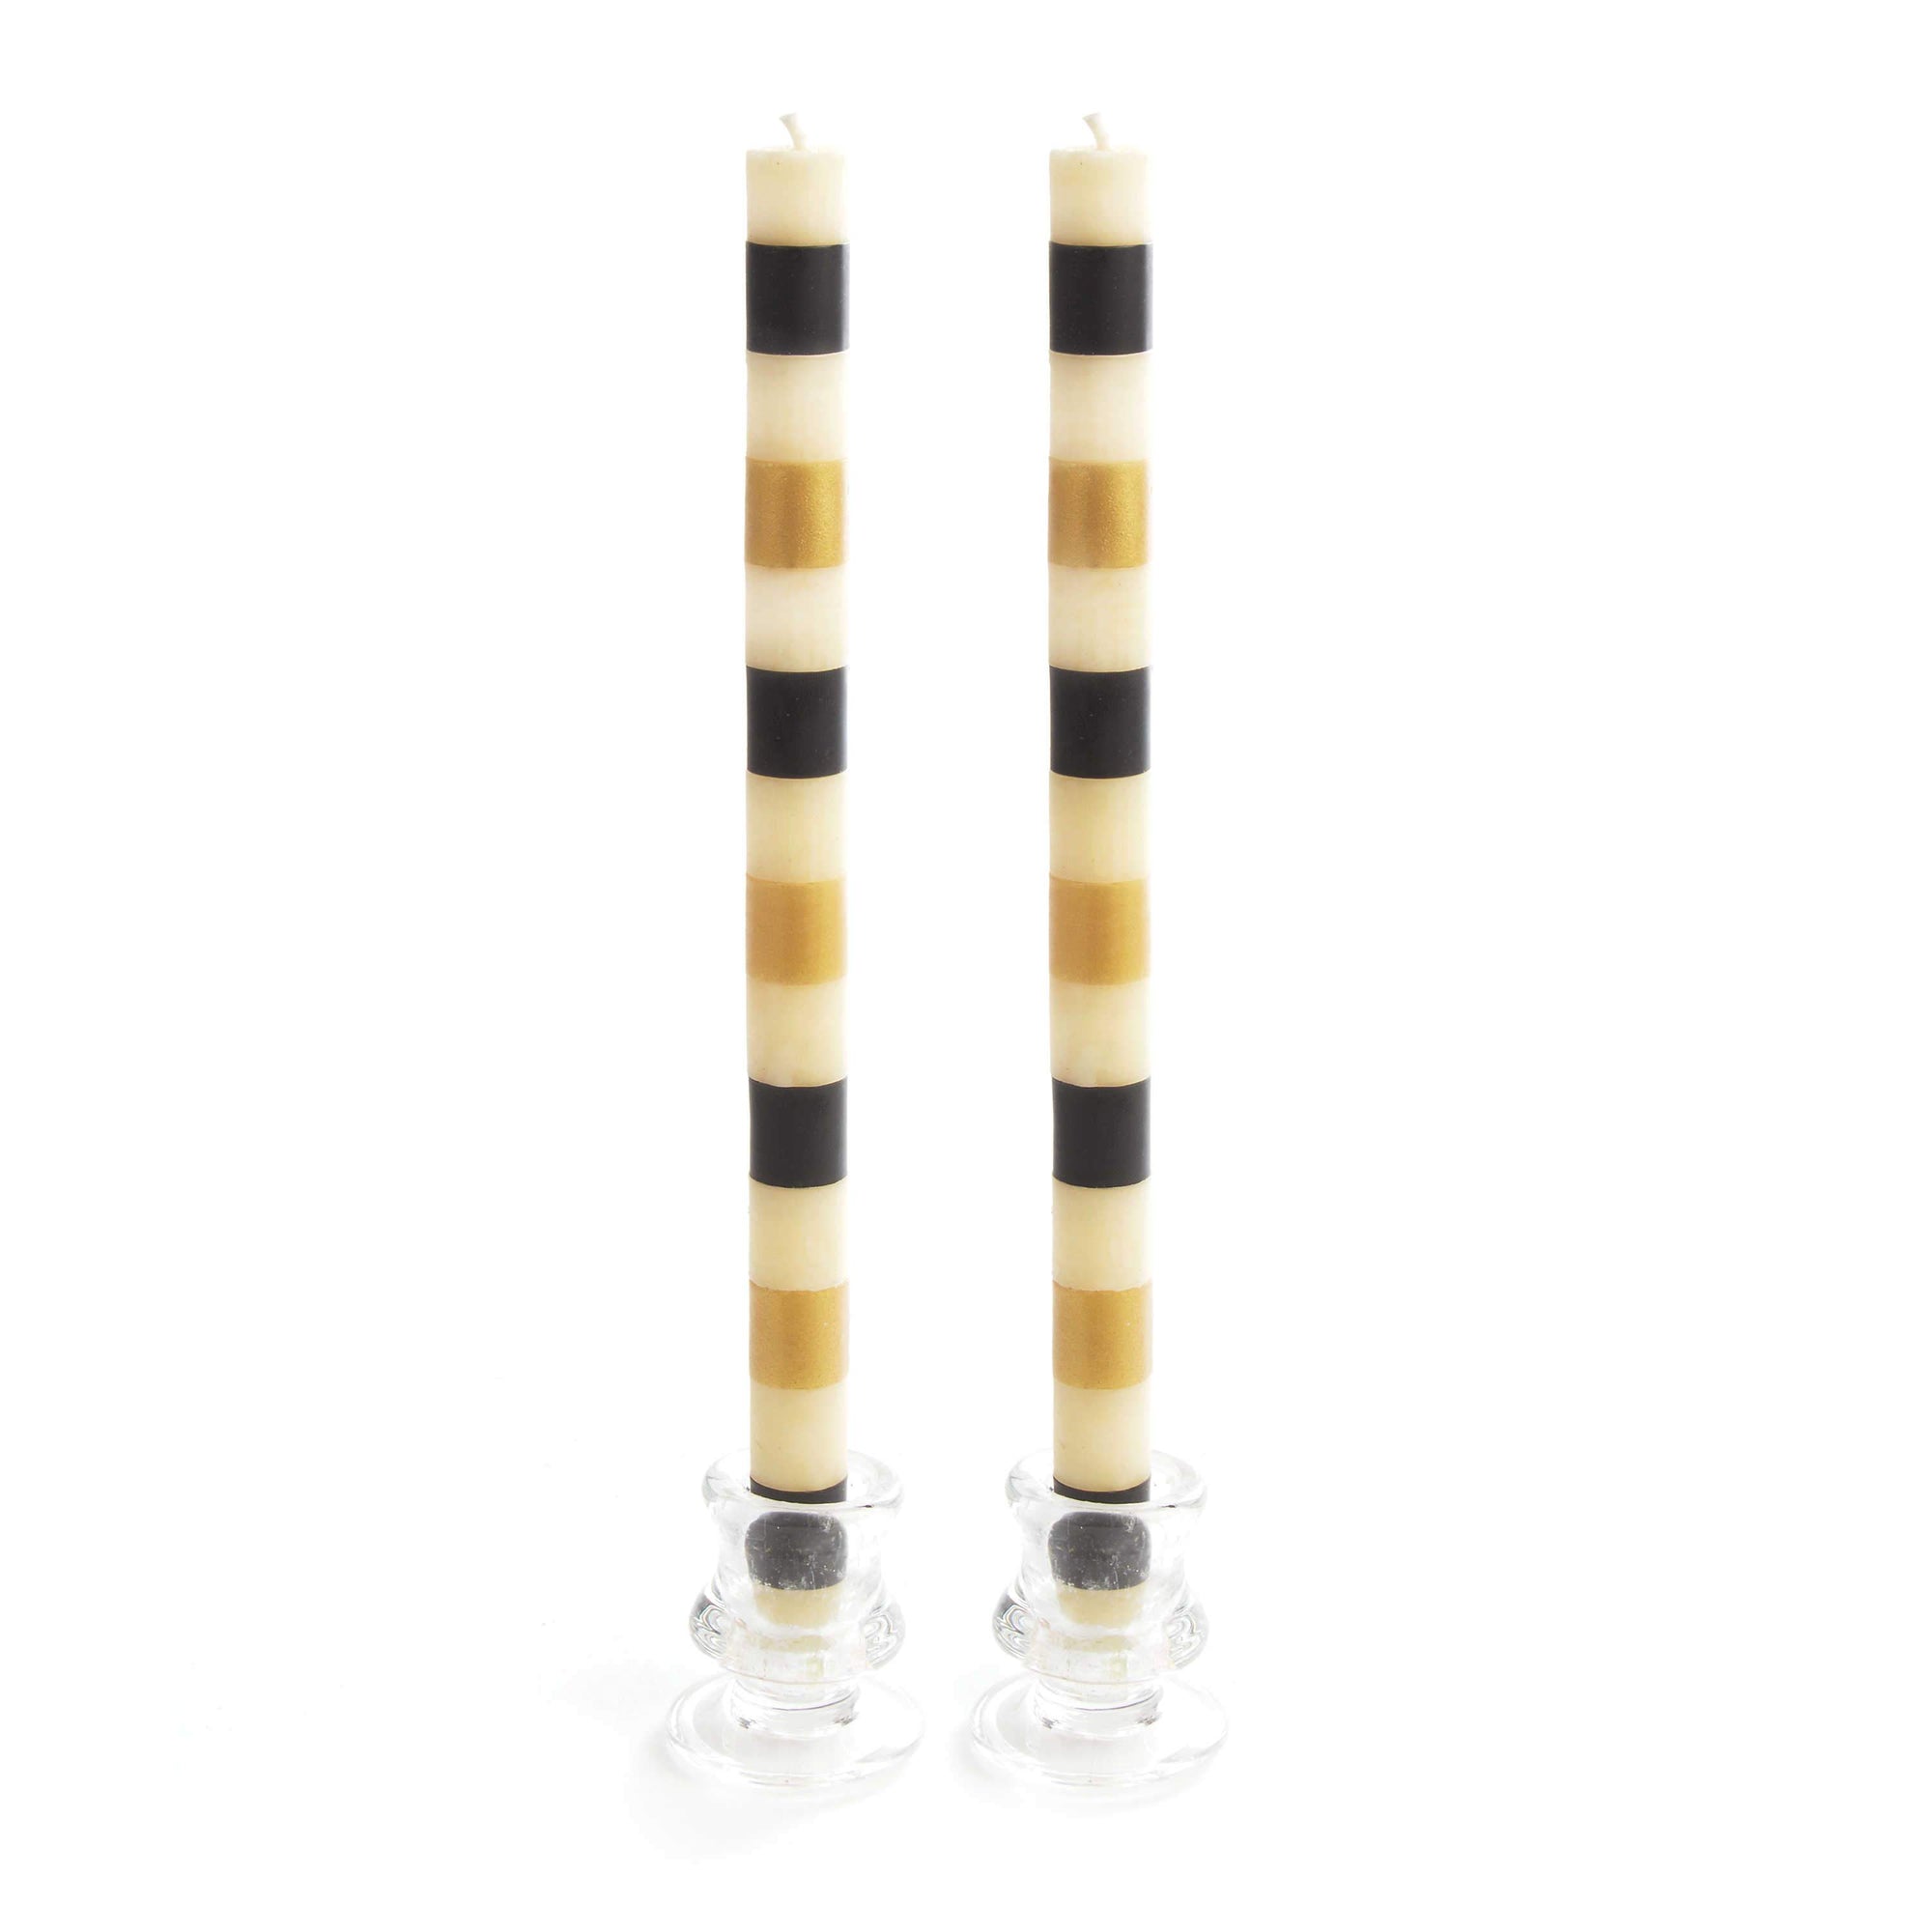 Black and Gold Candles - Set of 2 - My Christmas